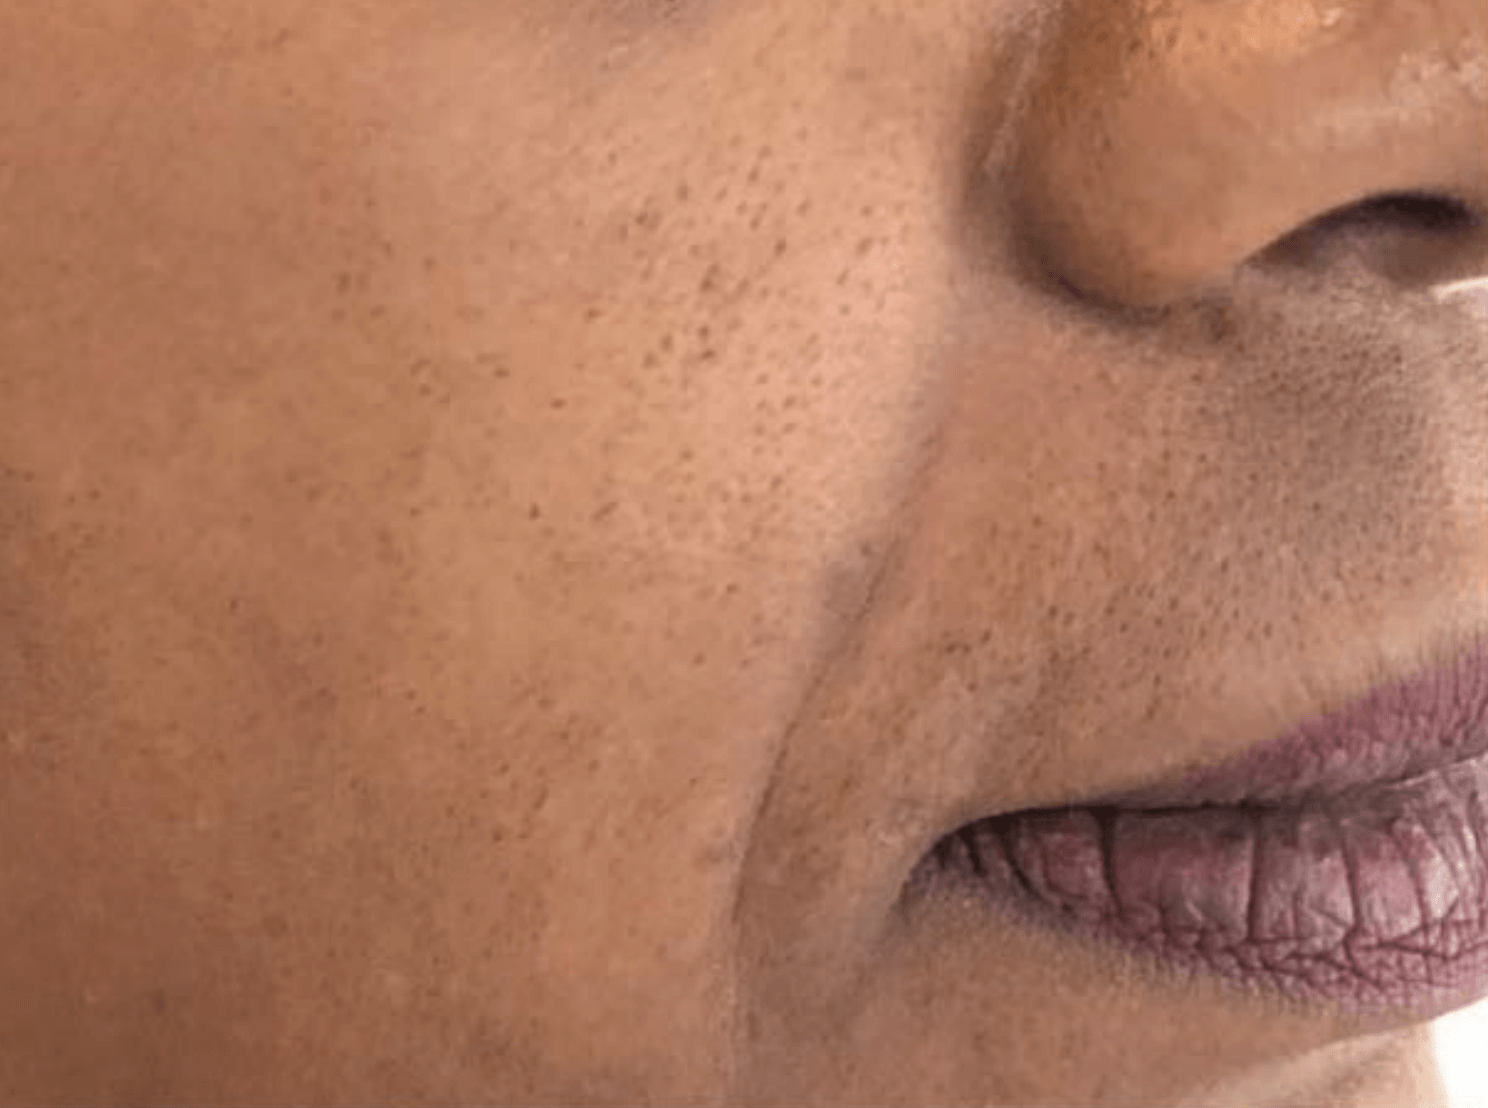 A close up of a woman 's face with her mouth open.